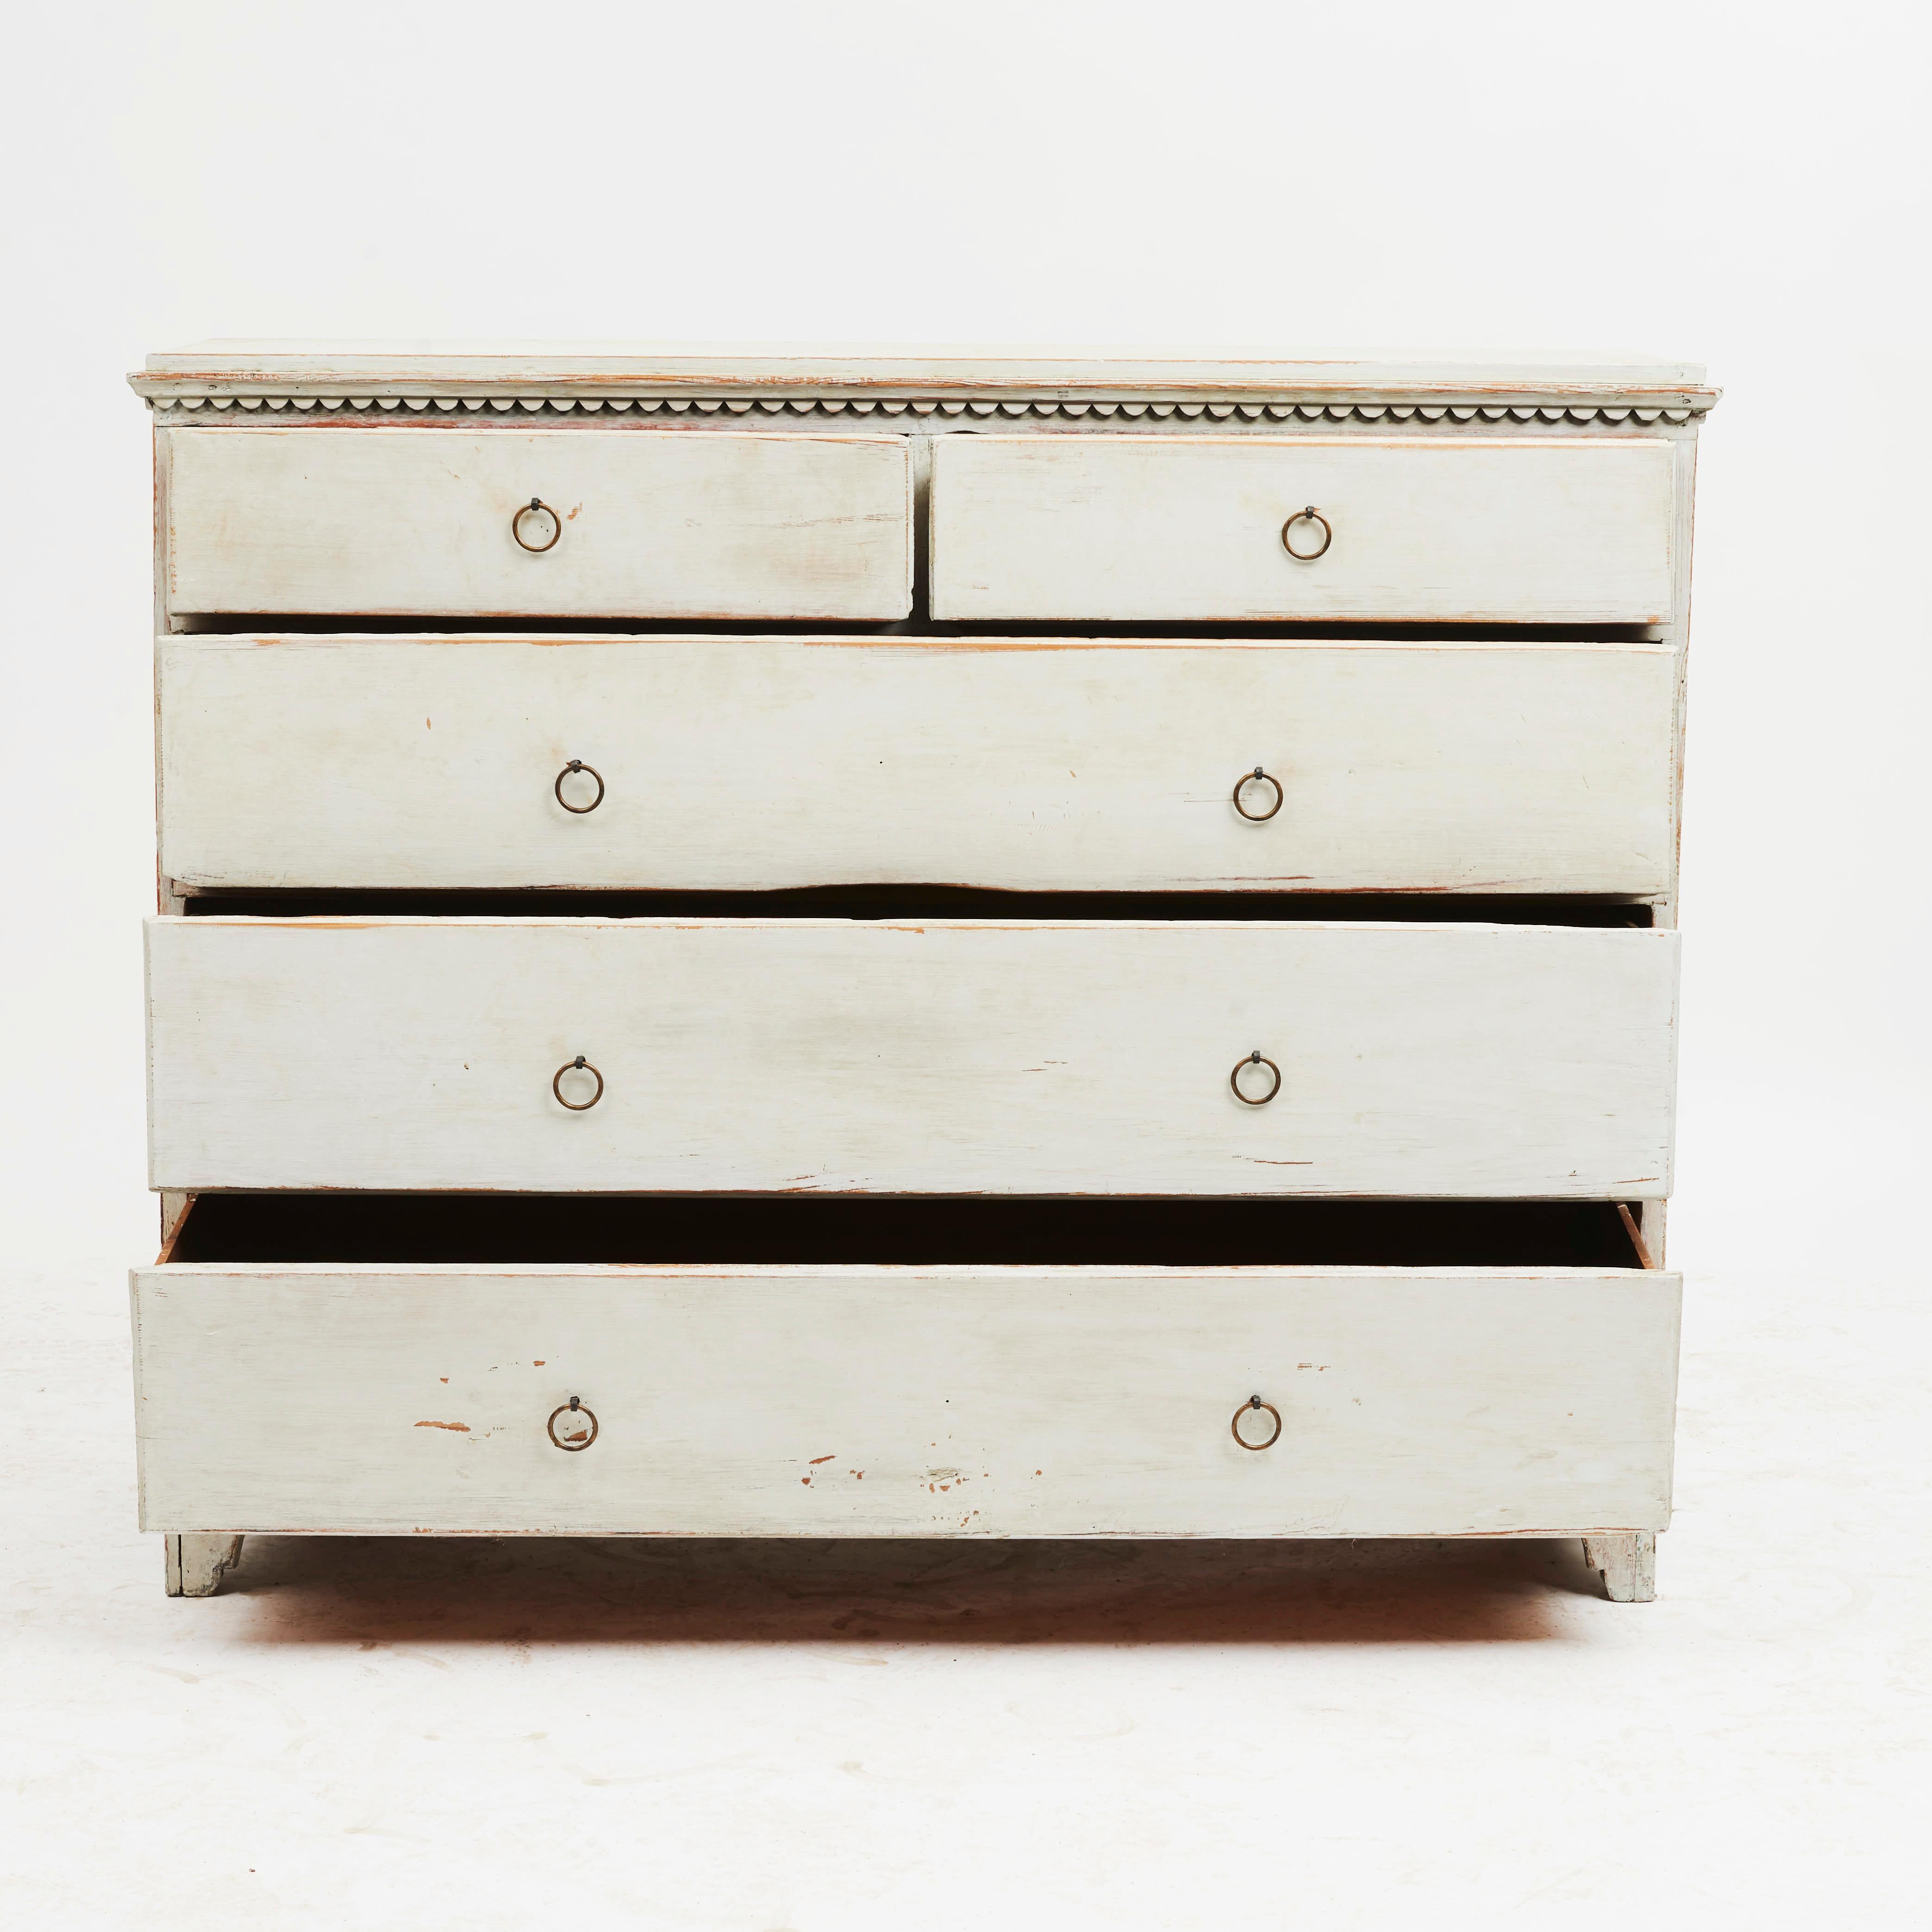 Swedish Gustavian chest of drawers. White / light grey.
Four drawers, square top over dentil molding.
Northern Sweden, circa 1840.